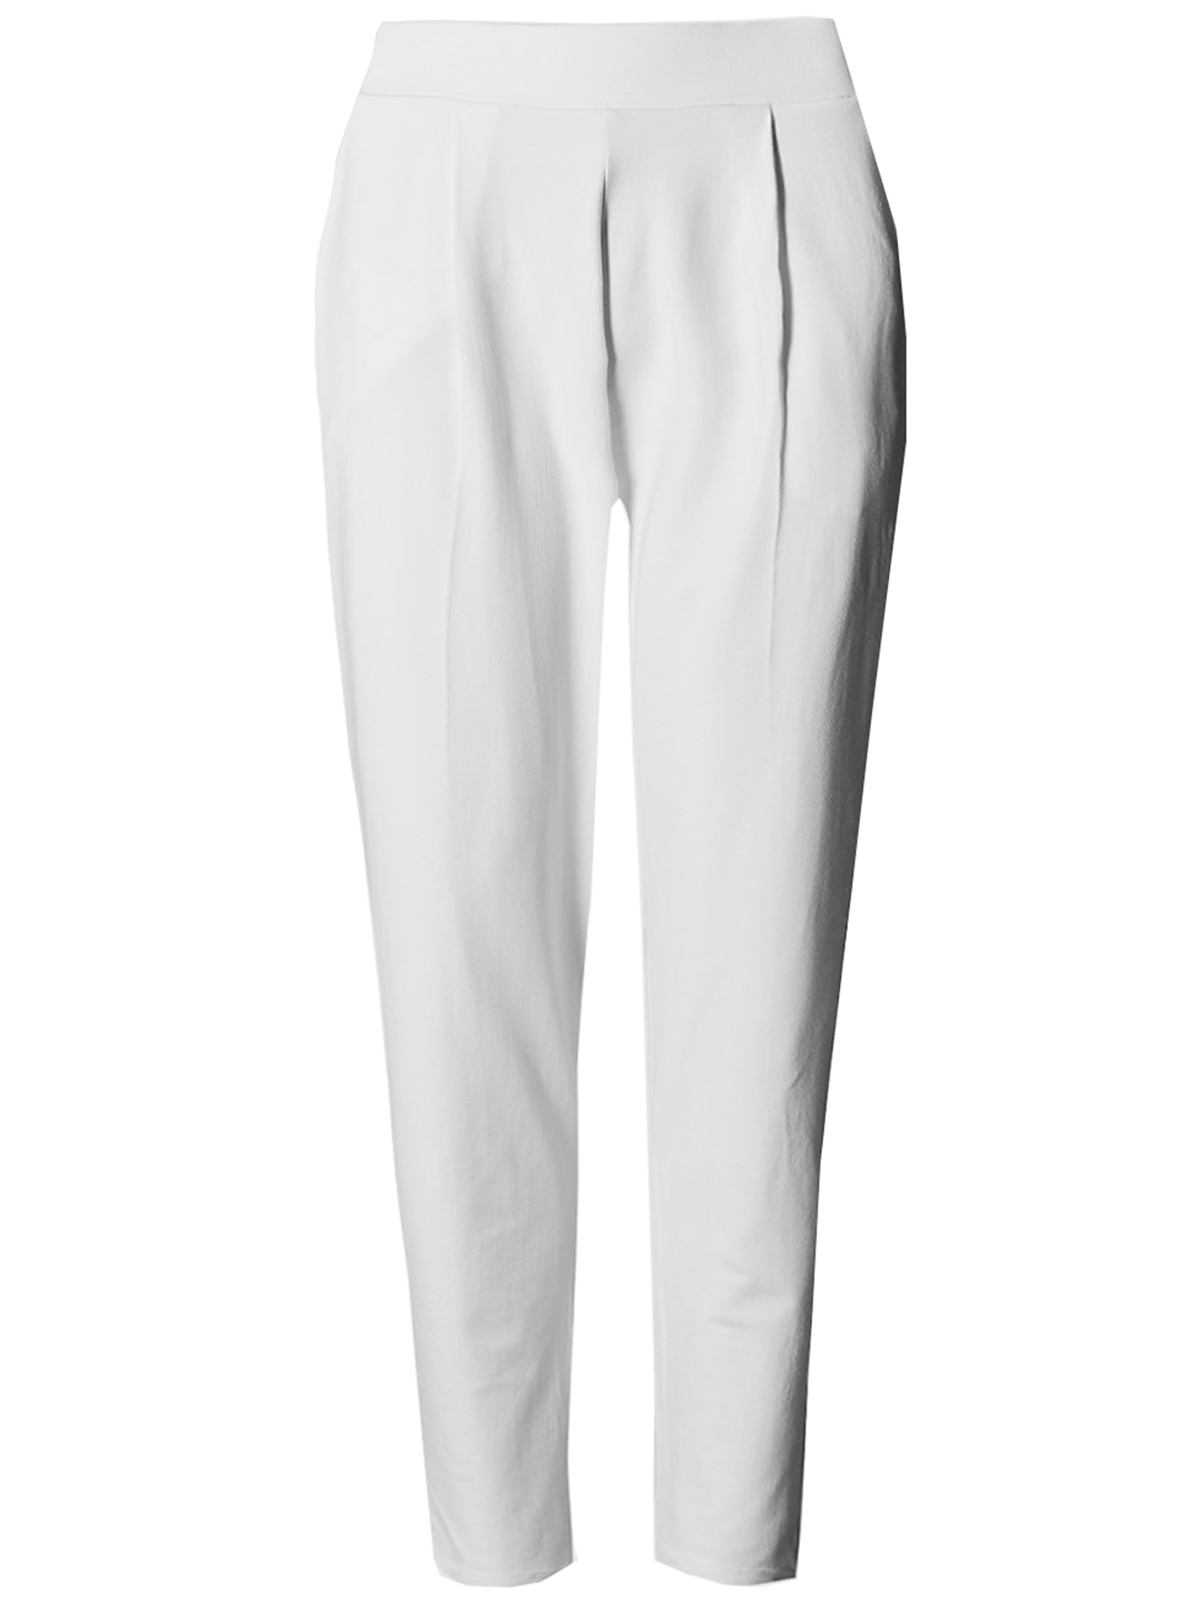 Marks and Spencer - - M&5 WHITE Pull On Tapered Leg Trousers - Size 18